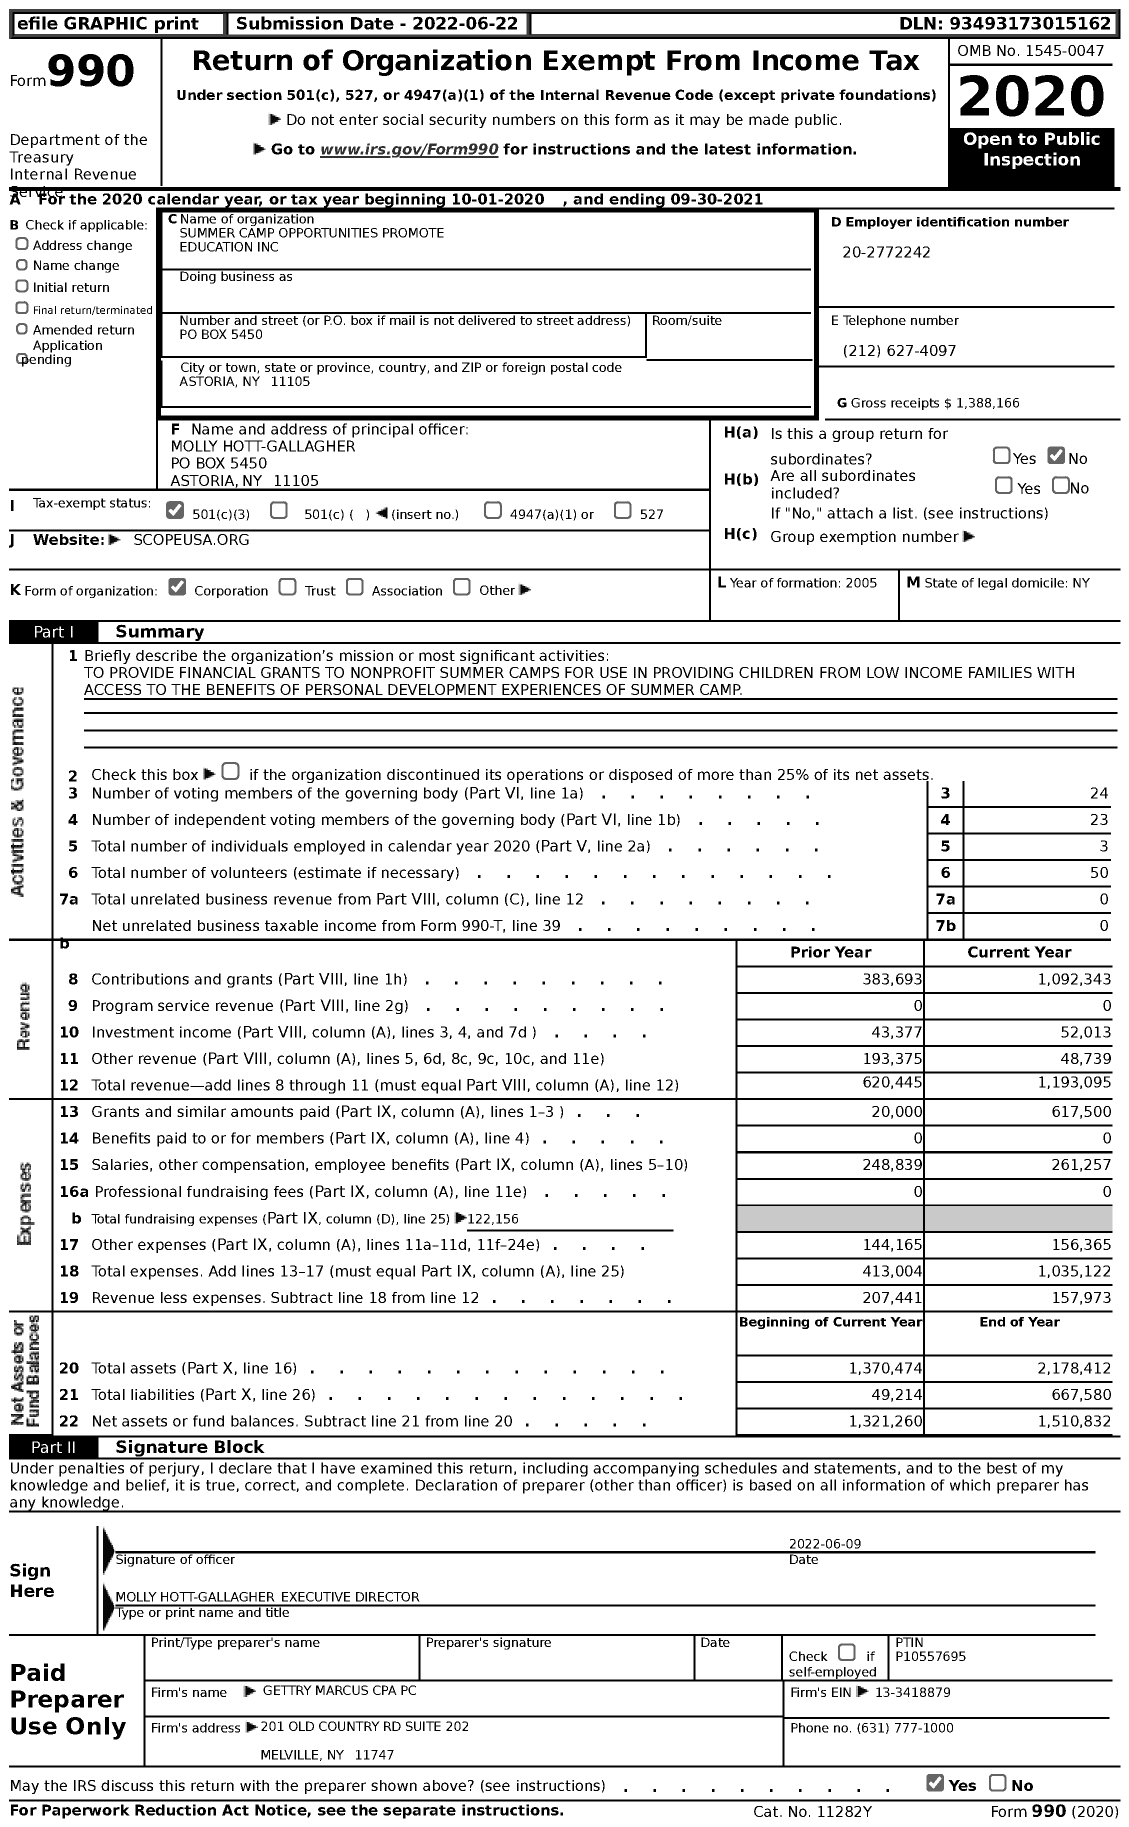 Image of first page of 2020 Form 990 for Summer Camp Opportunities Promote Education (SCOPE)